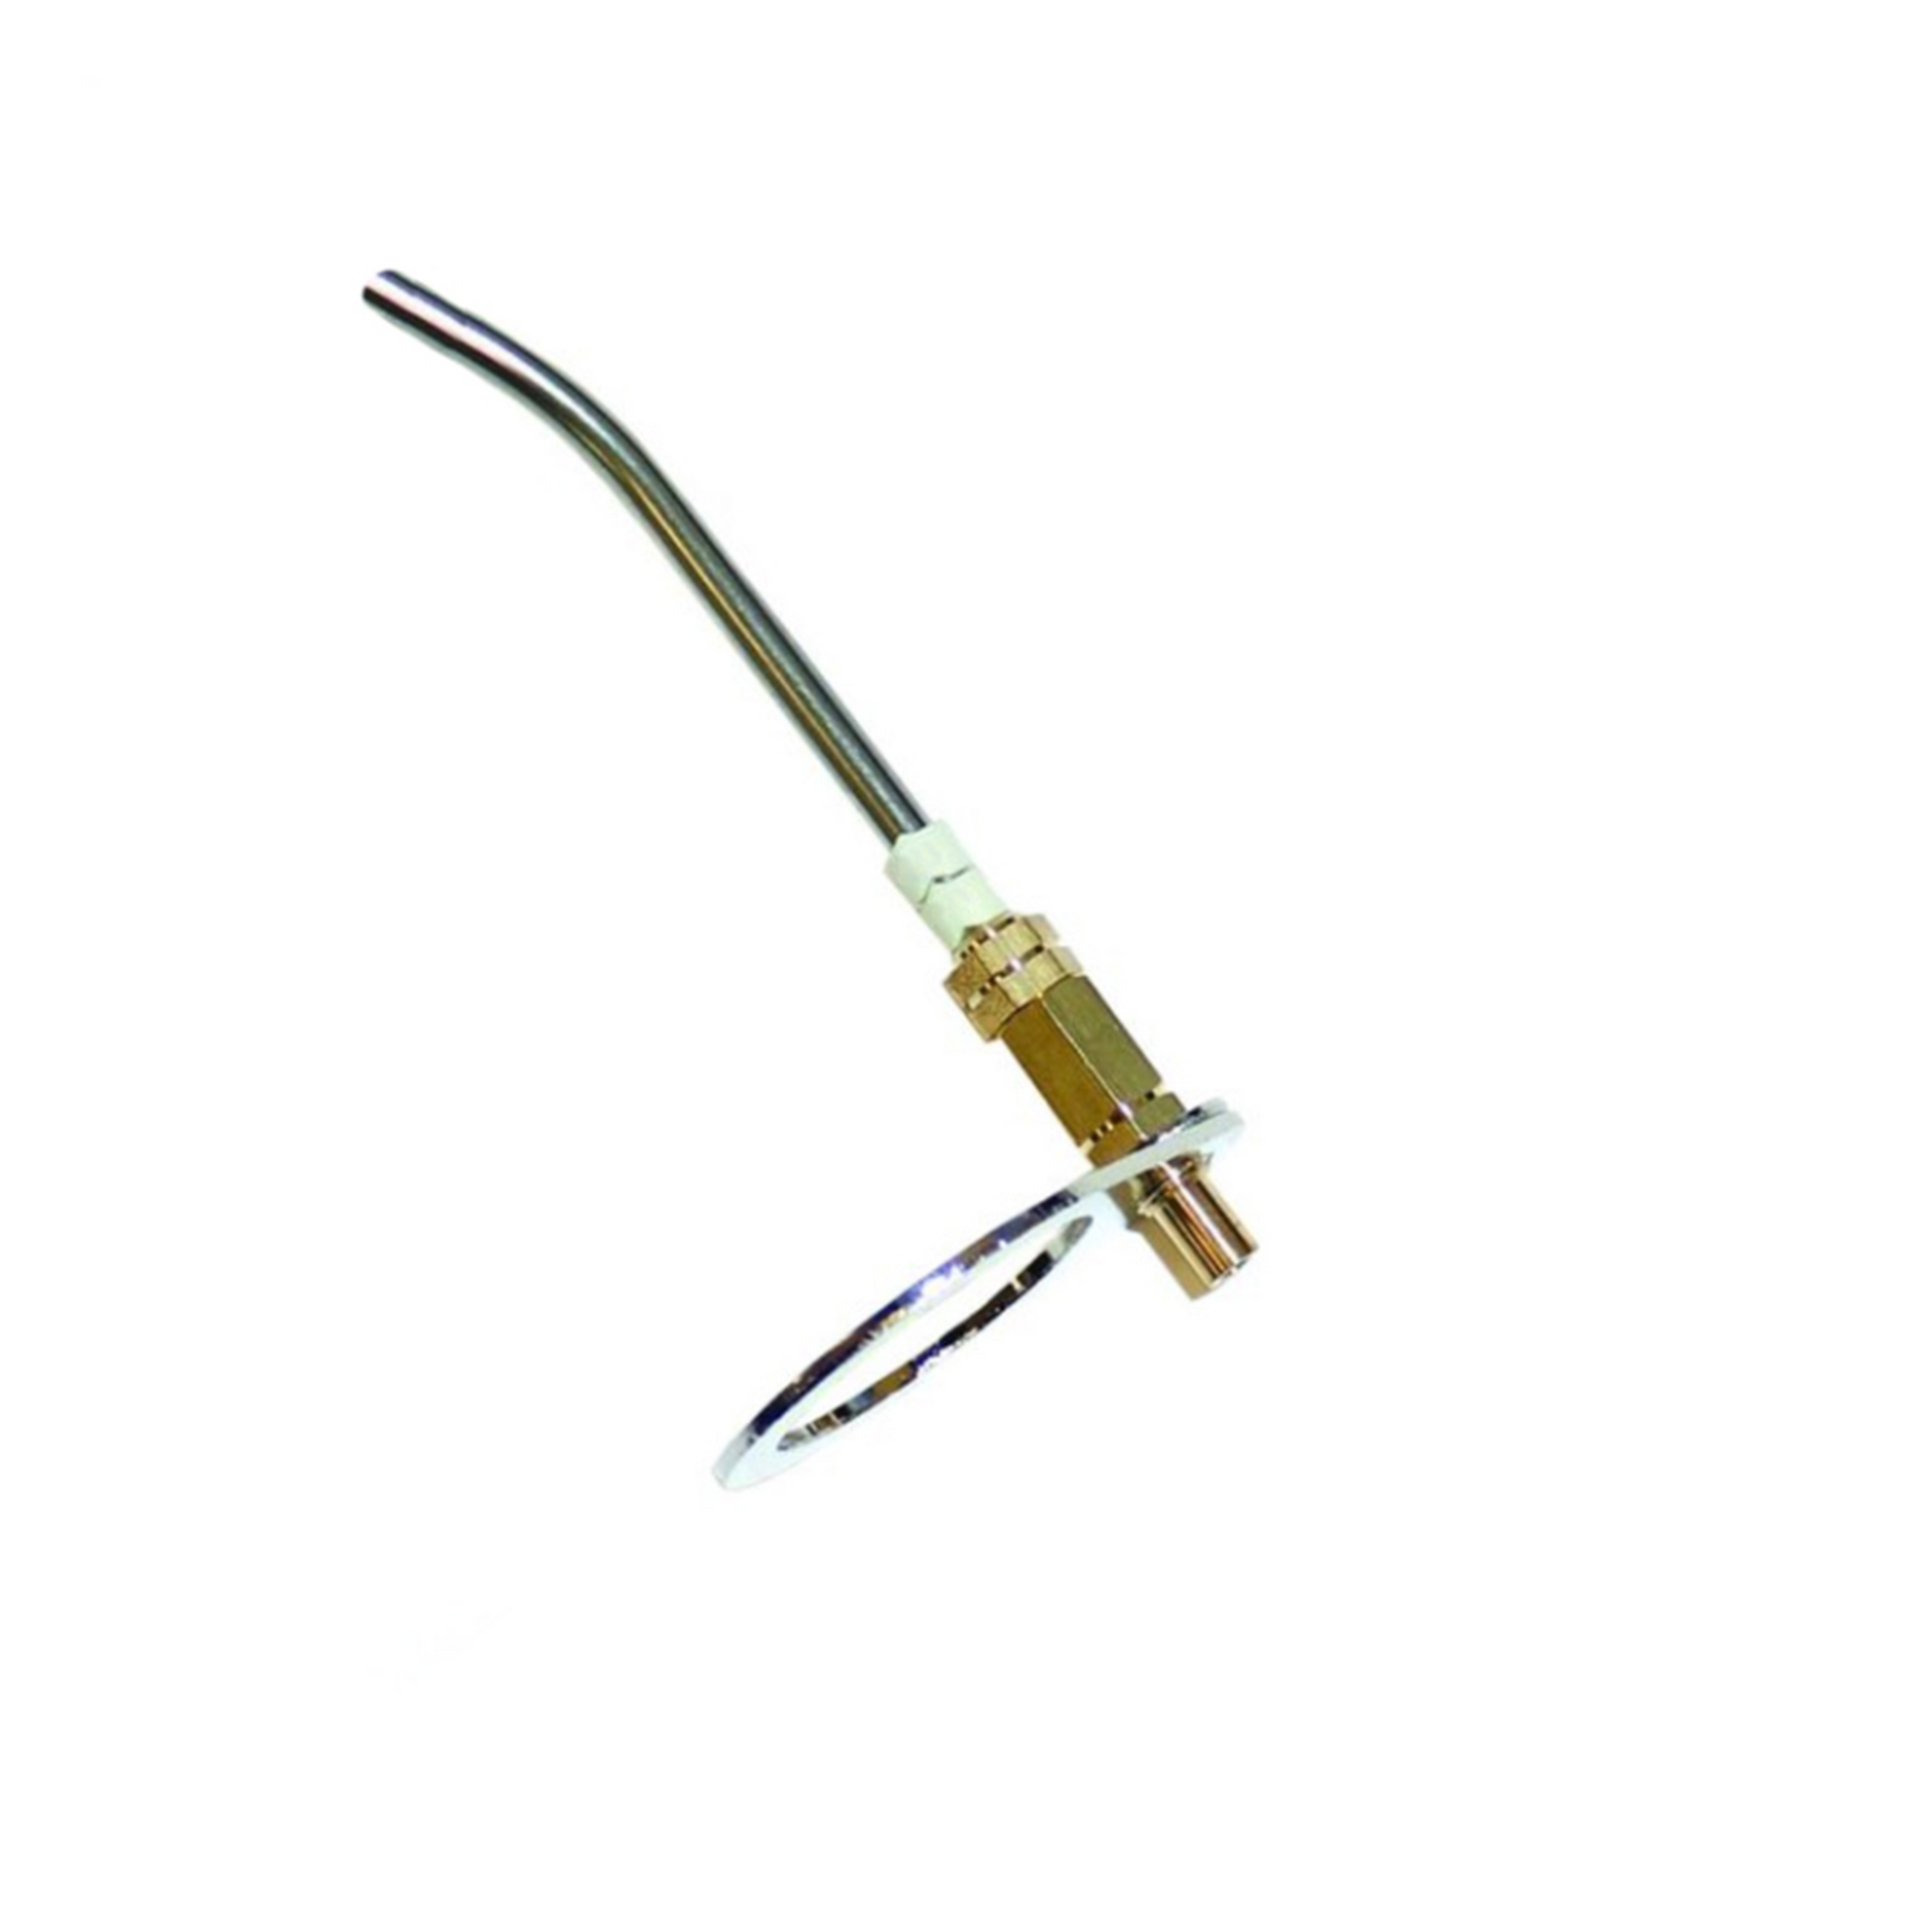 Hakko Products_ B3726 Feed pipe assembly 0.6MM_ Soldering Accessories_ Hakko Products